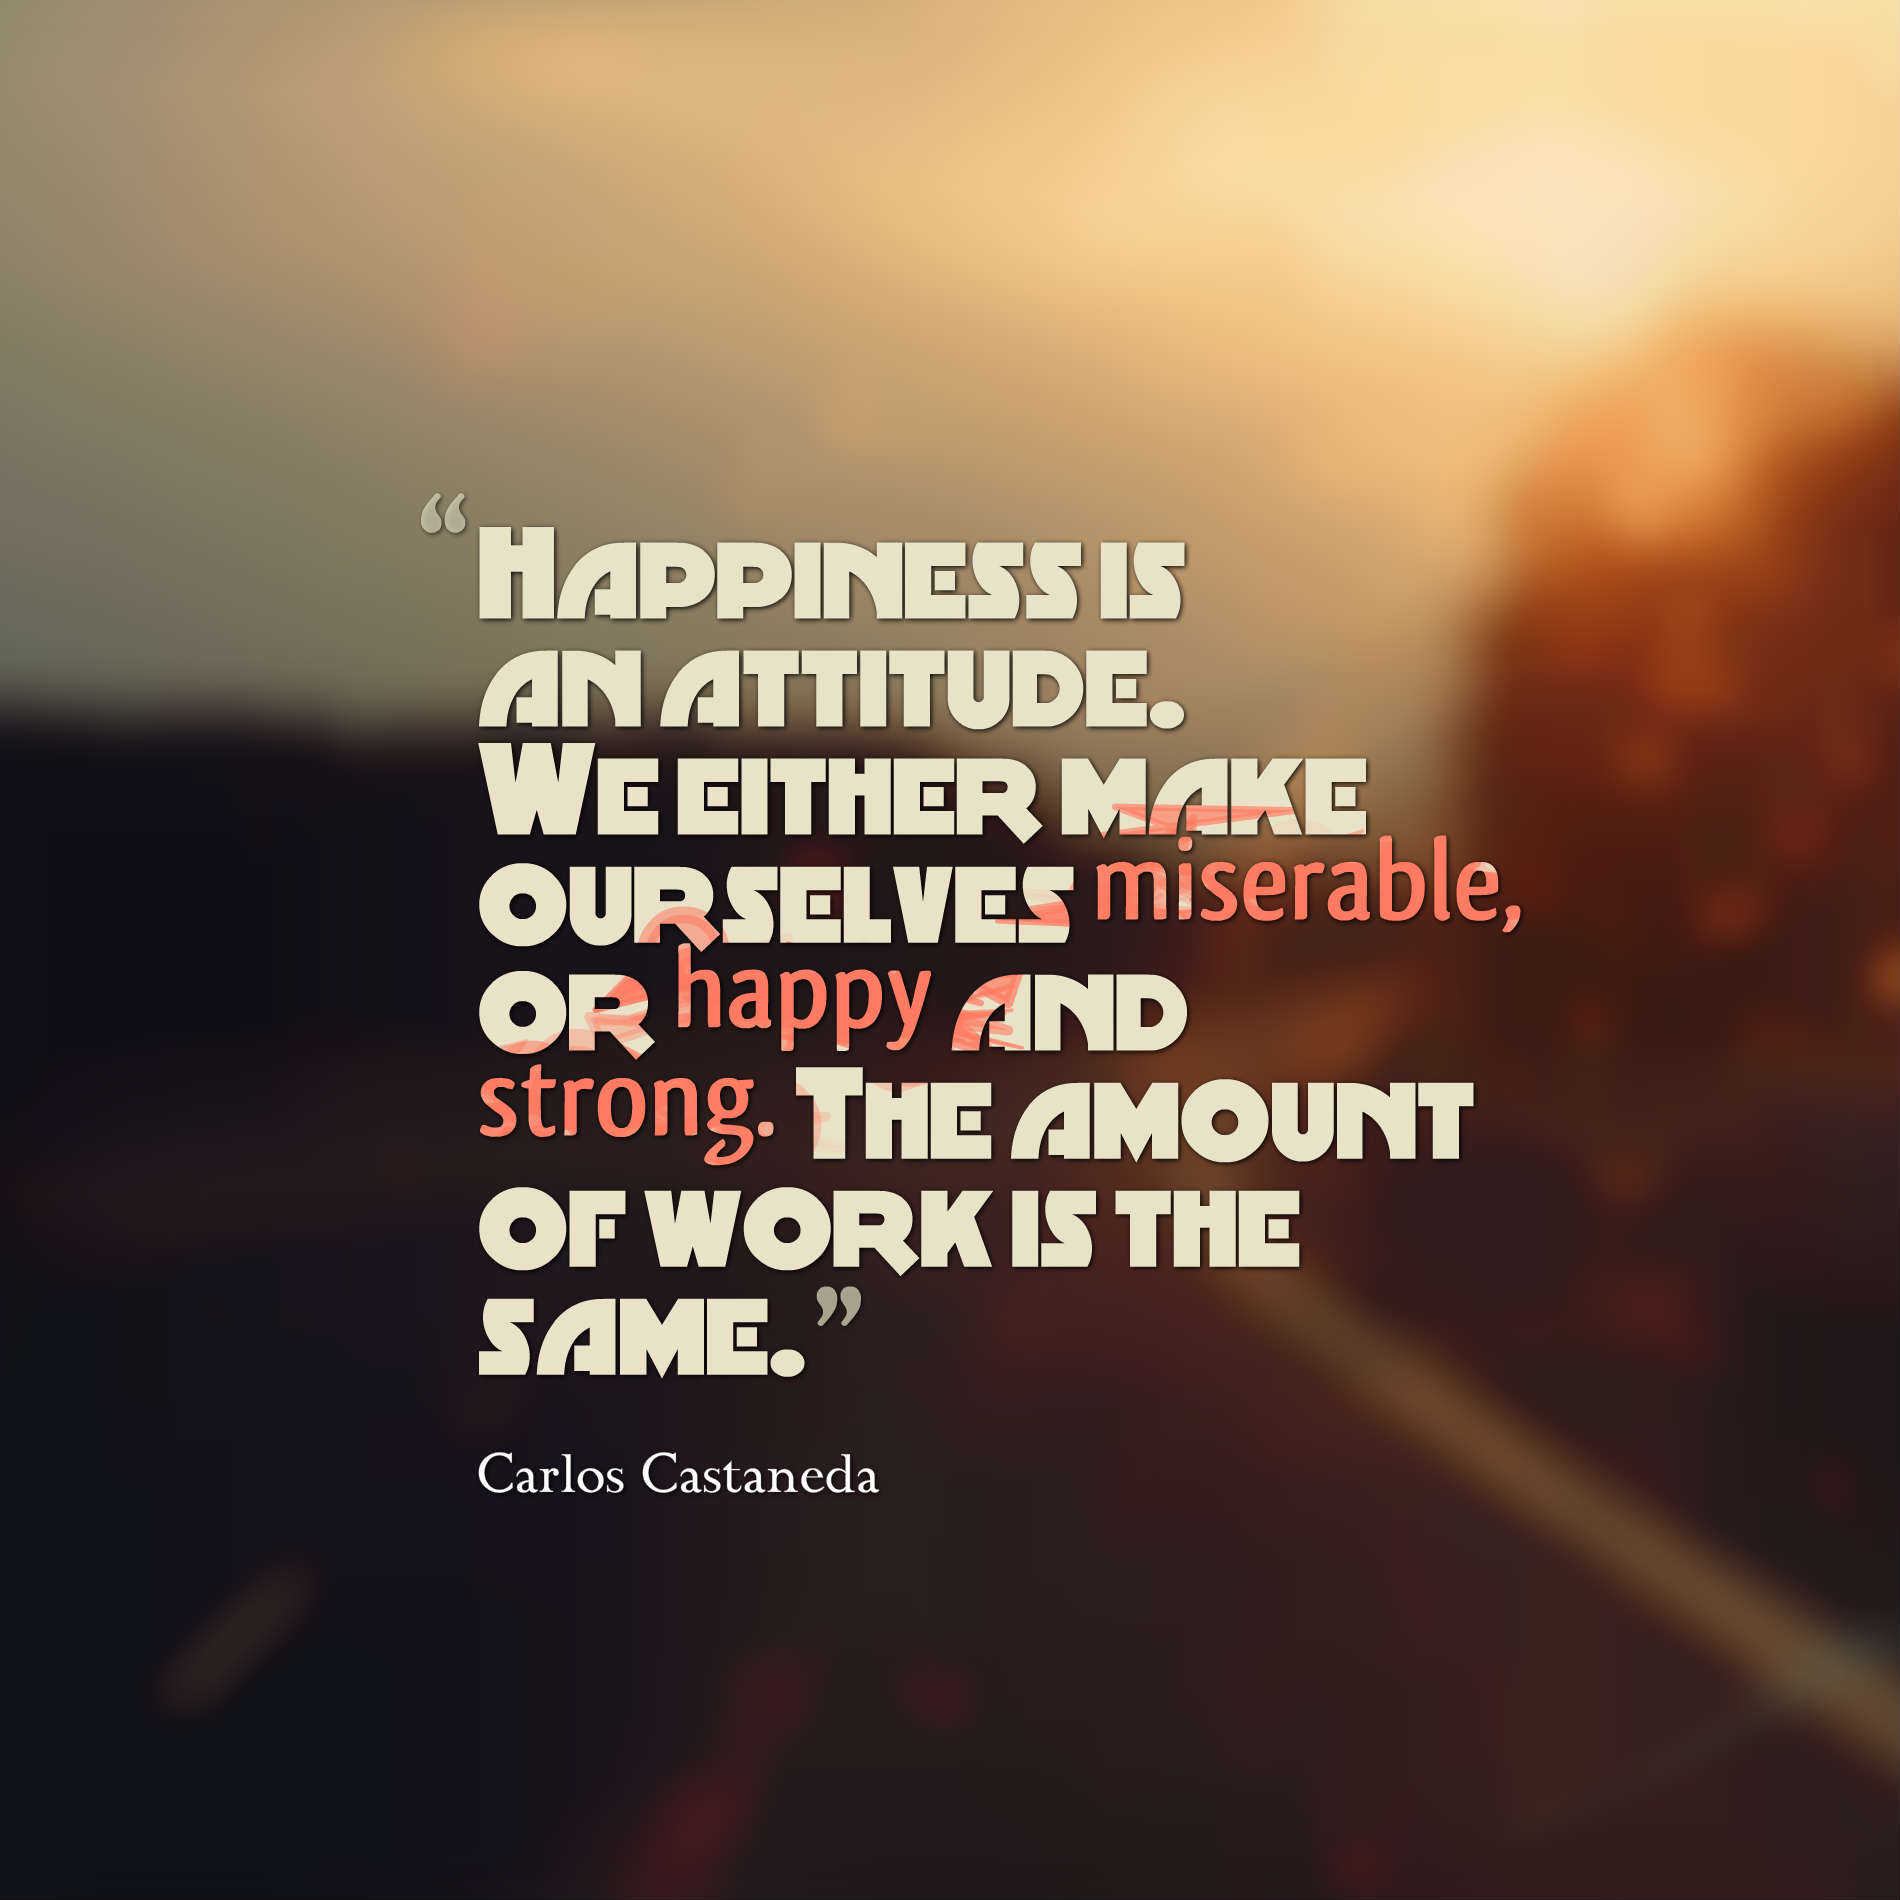 Happiness is an attitude. we either make ourselves miserable, or happy and strong. The amount of work is the same. Carlos Castaneda